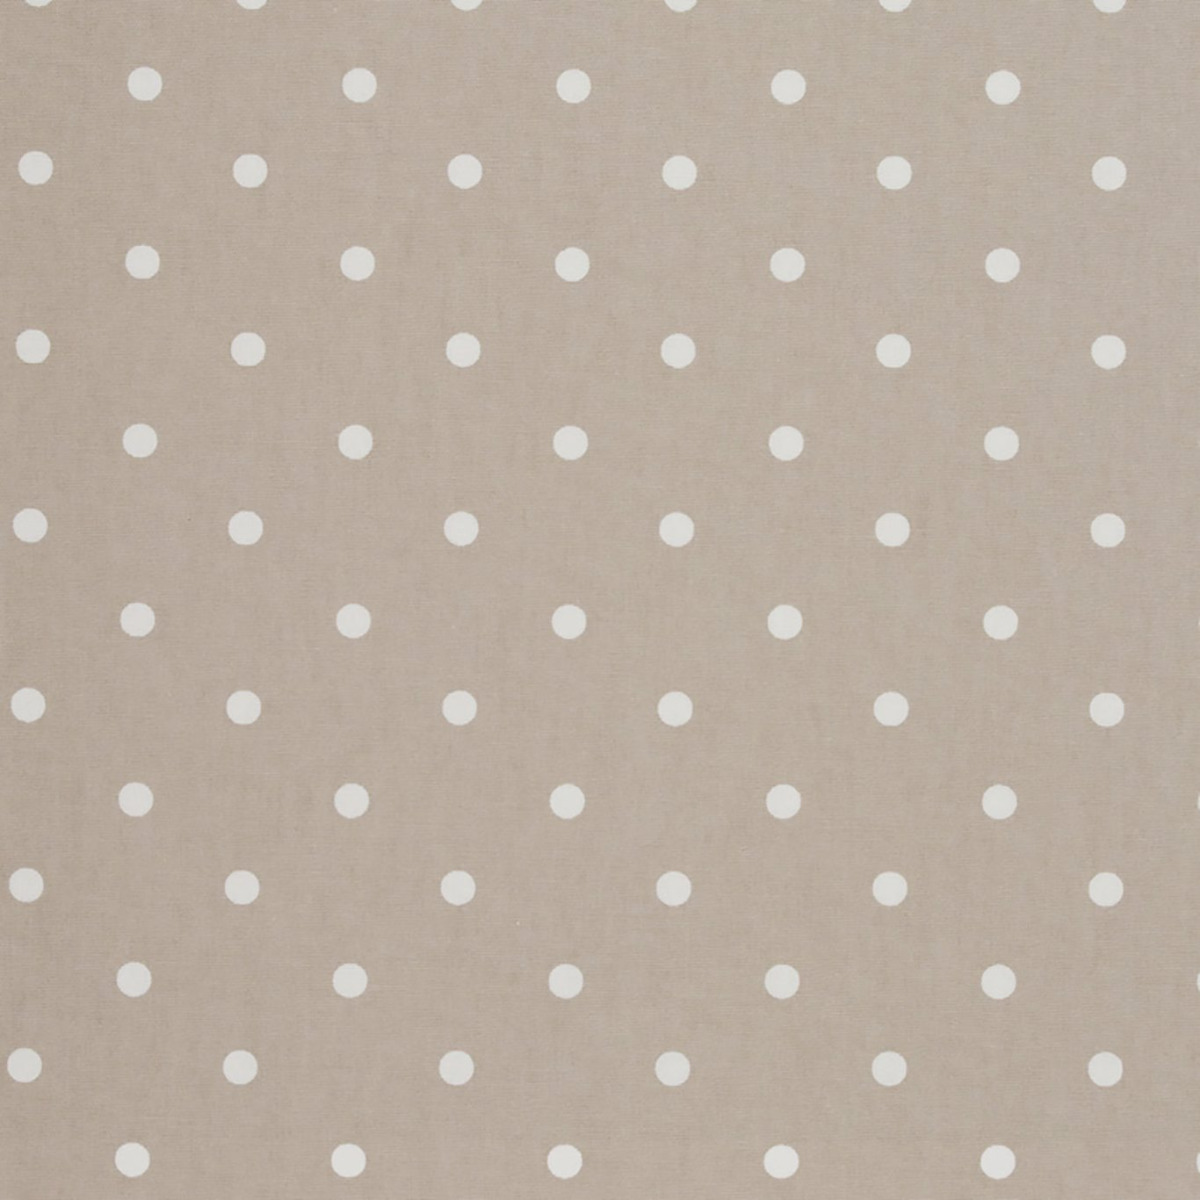 Oilcloth Dotty taupe